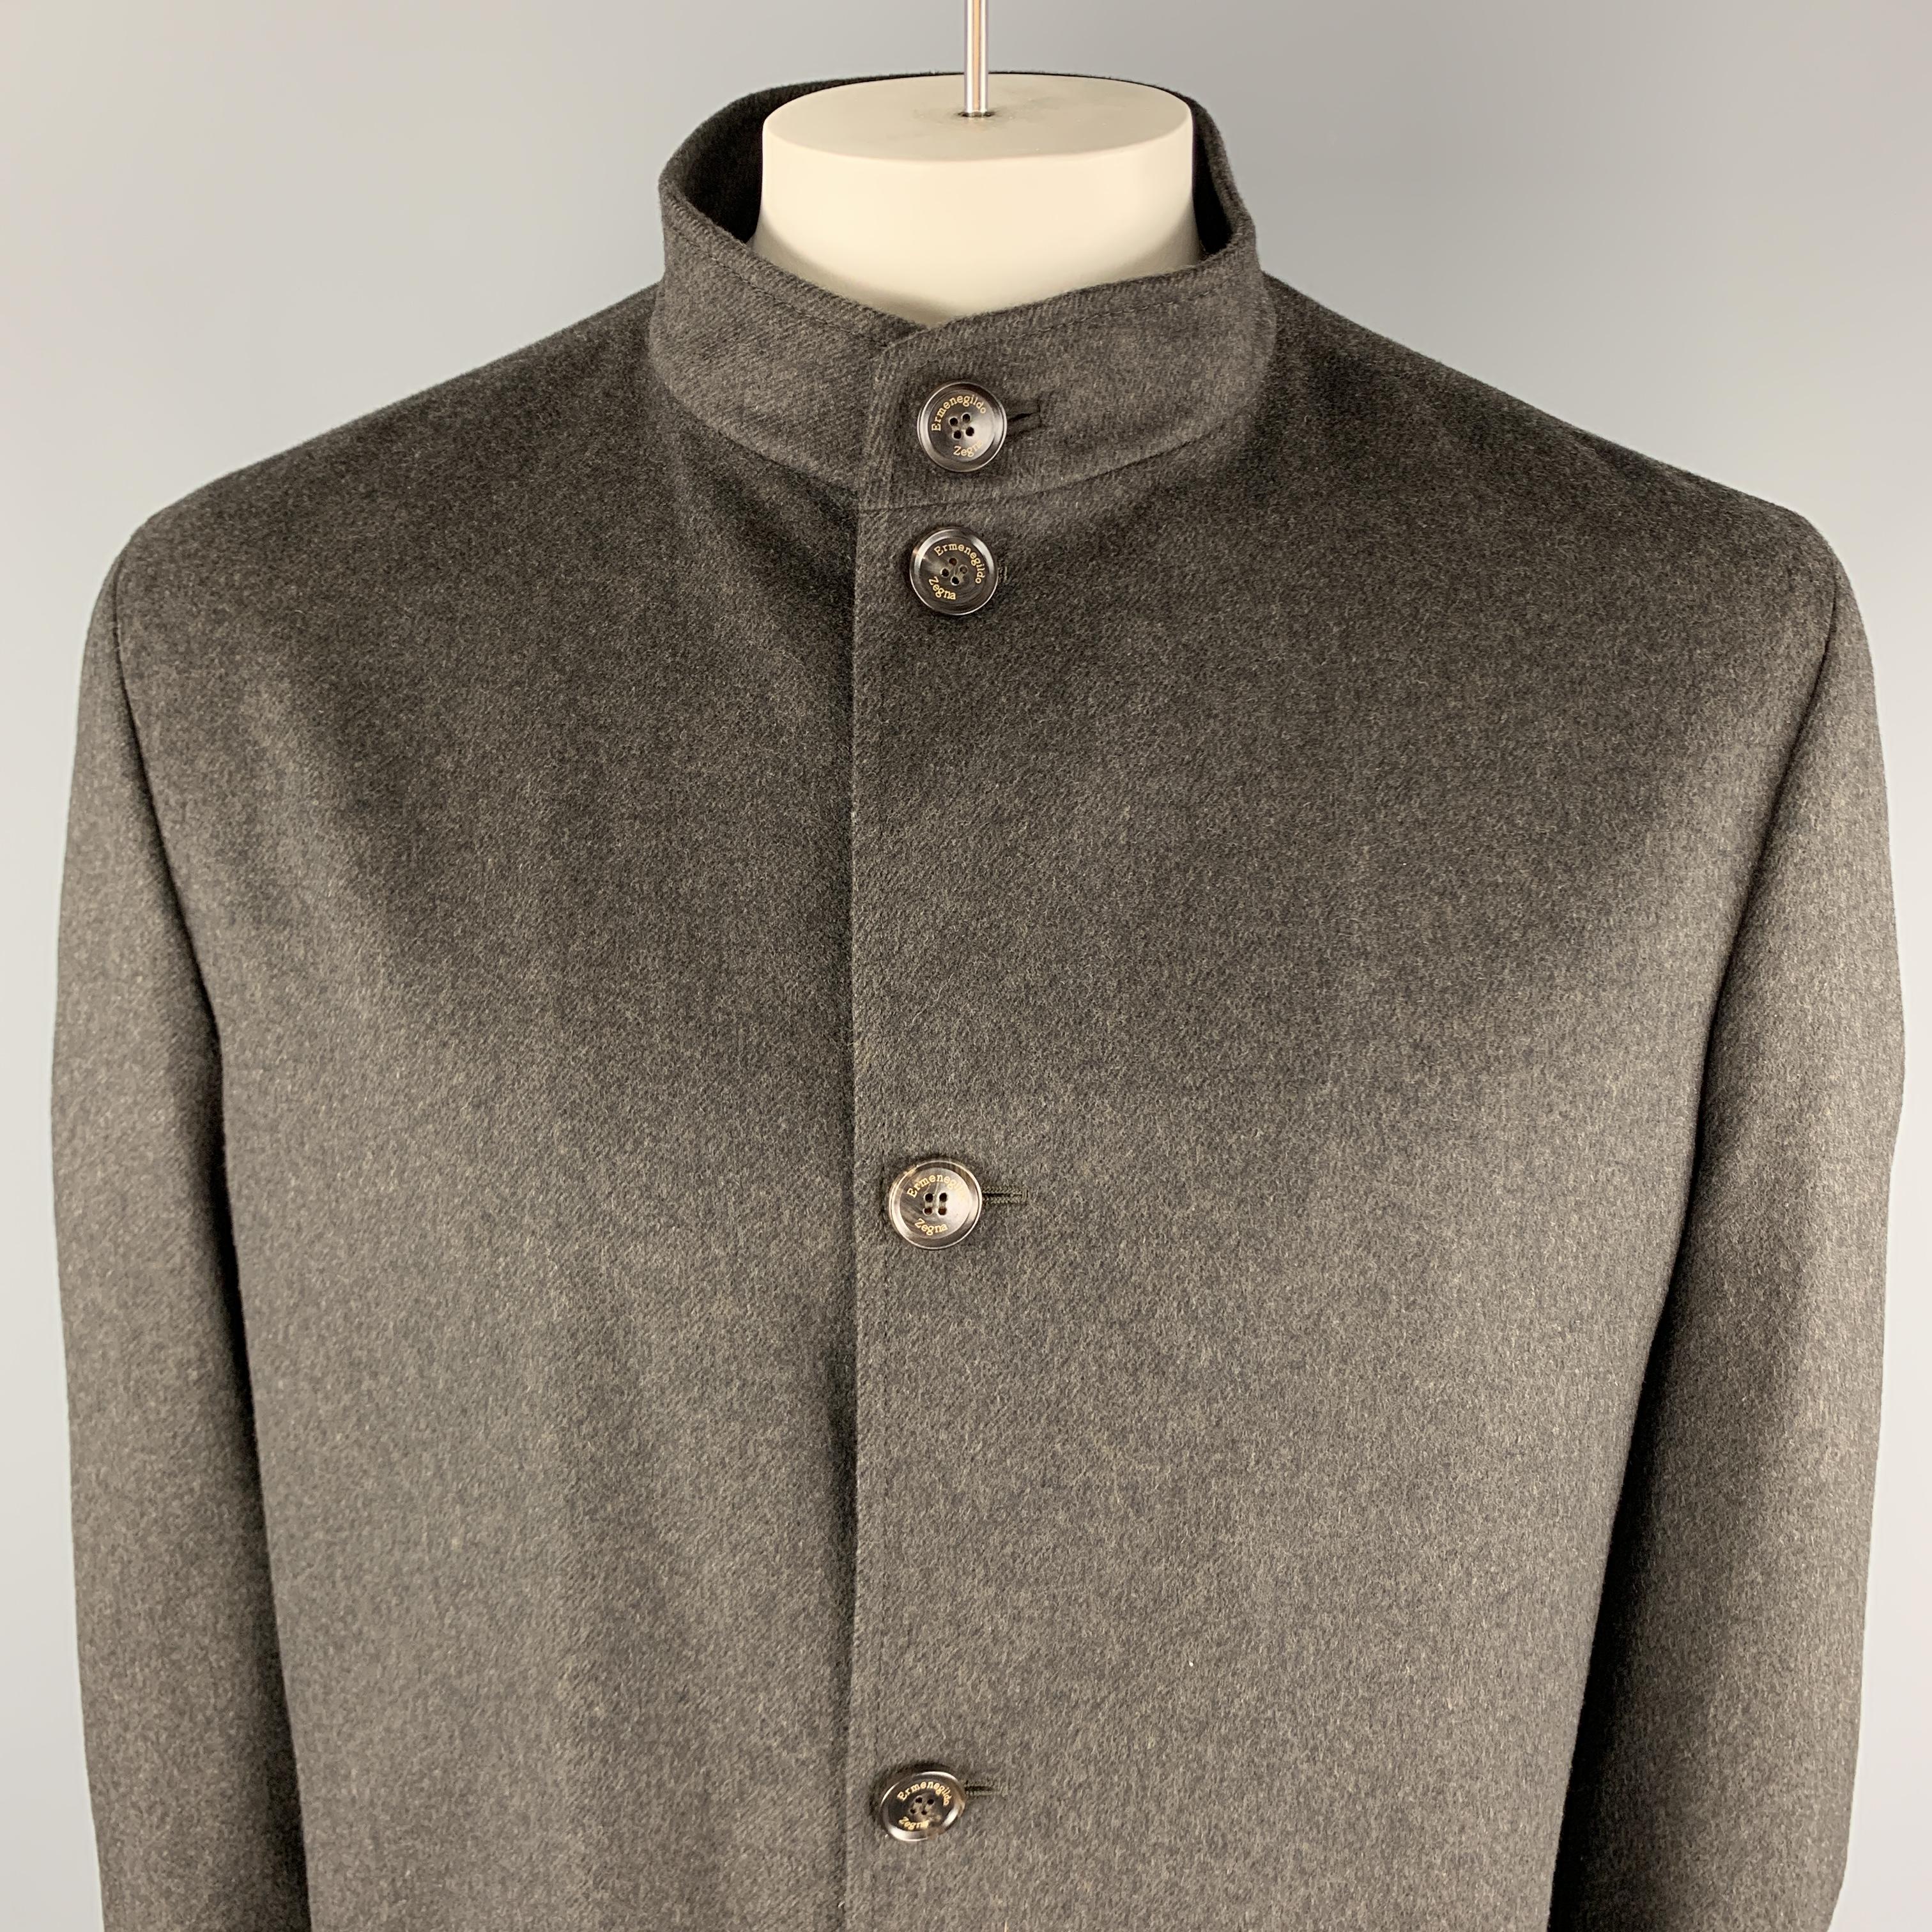 ERMENEGILDO ZEGNA Jacket comes in a solid charcoal wool material, with a nehru collar, a buttoned front, patch pockets, unbuttoned cuffs and inner pockets. Made in Italy.

Excellent Pre-Owned Condition.
Marked: XXL / 56 

Measurements:

Shoulder: 19